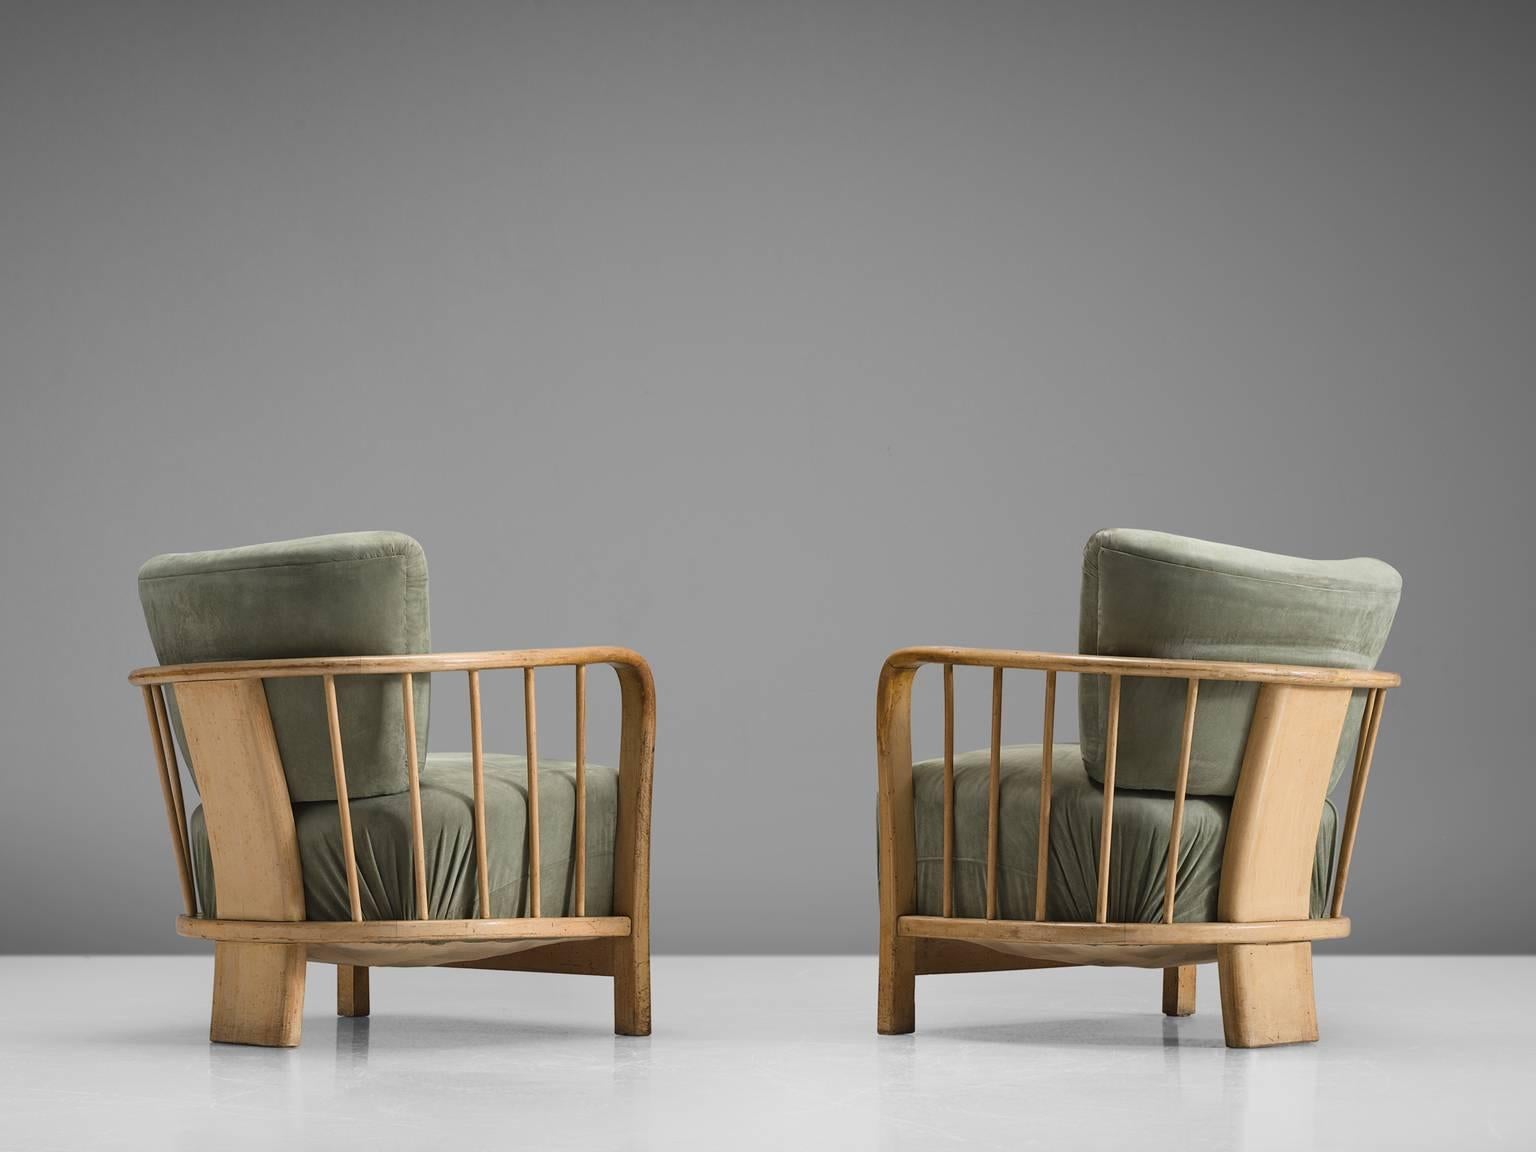 Lounge chairs in ash and olive green fabric, Western-Europe, 1960s

This set has a very sculptural, open frame. The three thick, sturdy legs hold the slatted baskets and have a robust, geometric shape. The chairs are strong in their design and